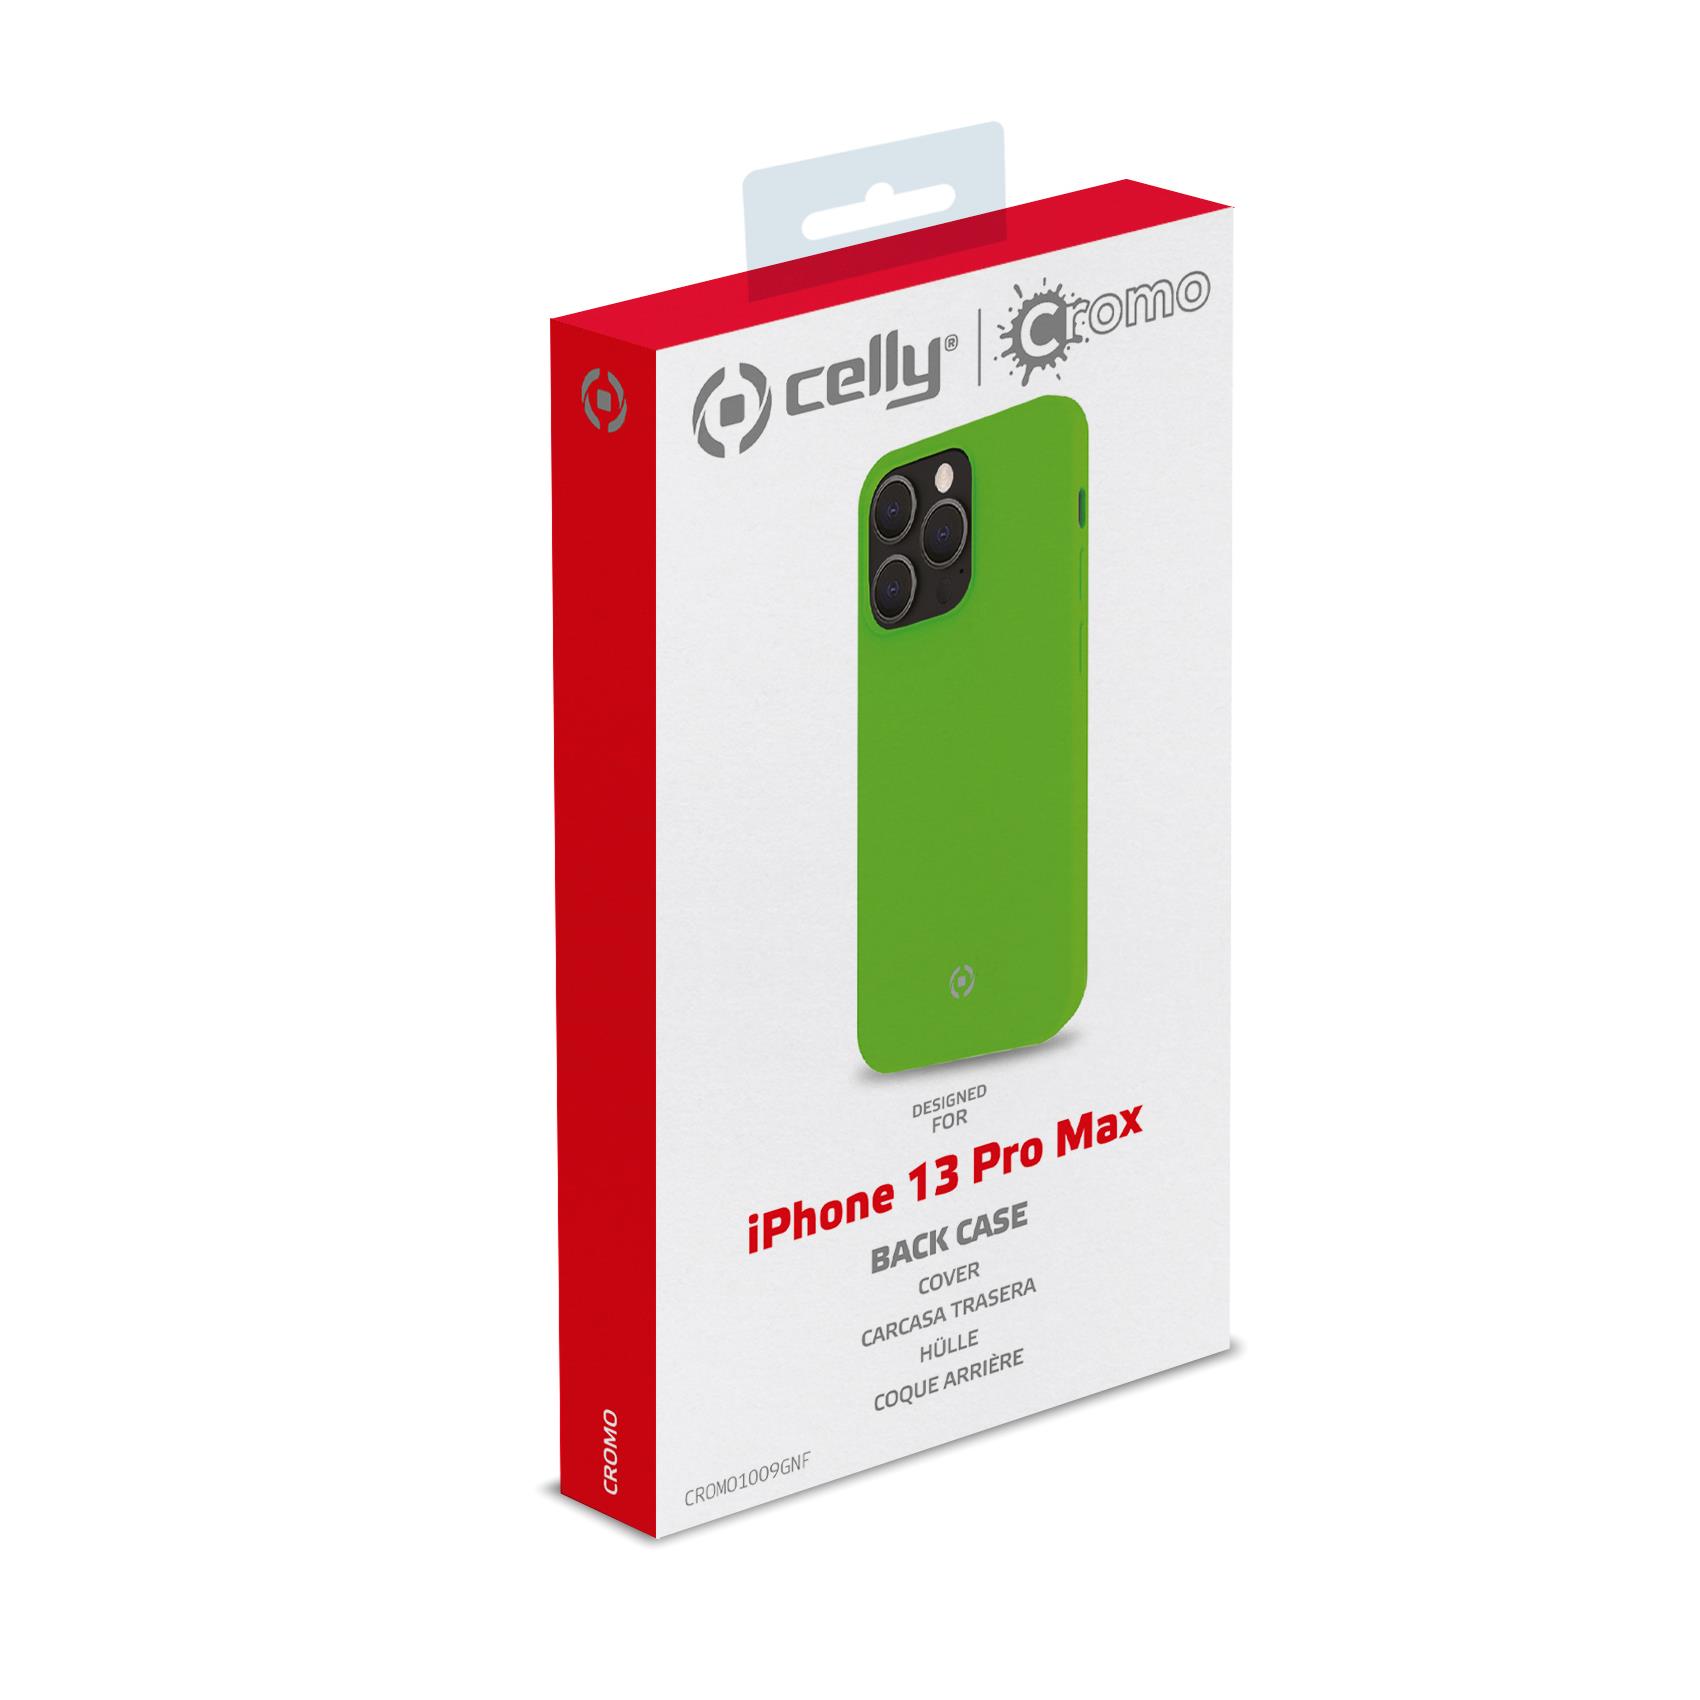 Cromo Fluo Iphone 13 Pro Max Gn Celly Cromo1009gnf 8021735190547